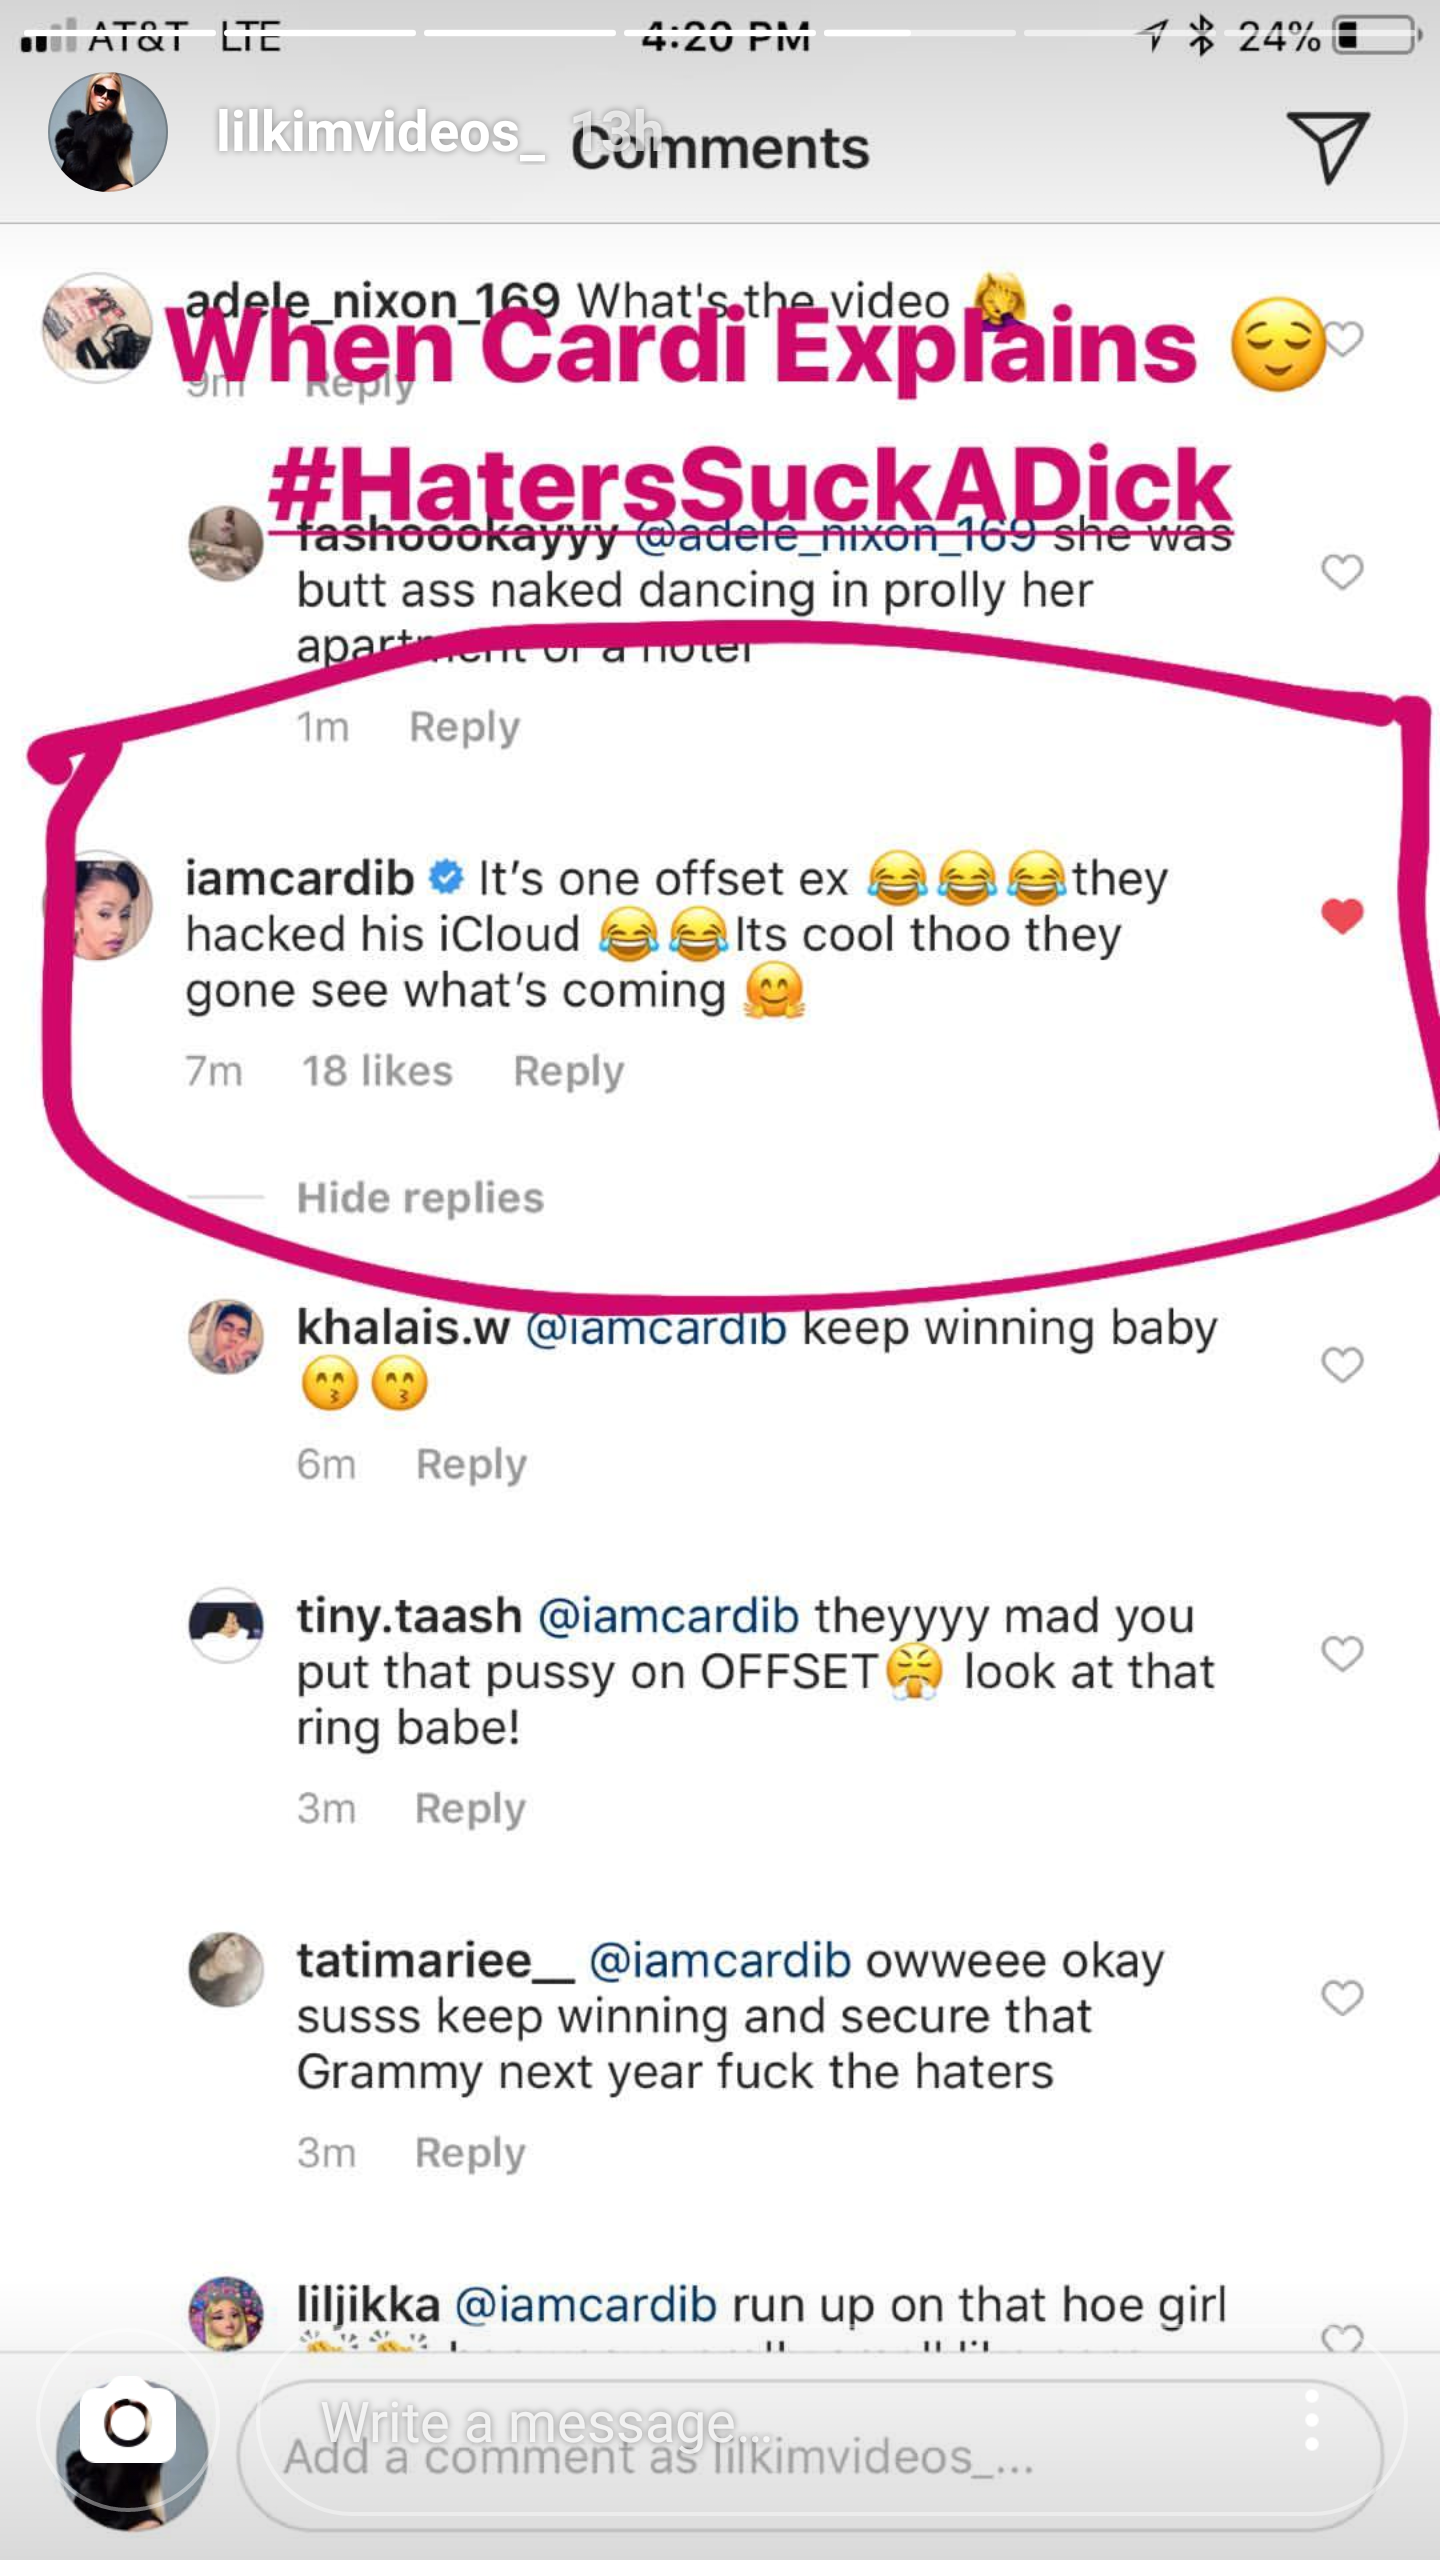 Cardi B Says Offsets Ex Hacked His Icloud And Released Videos Of Cardi